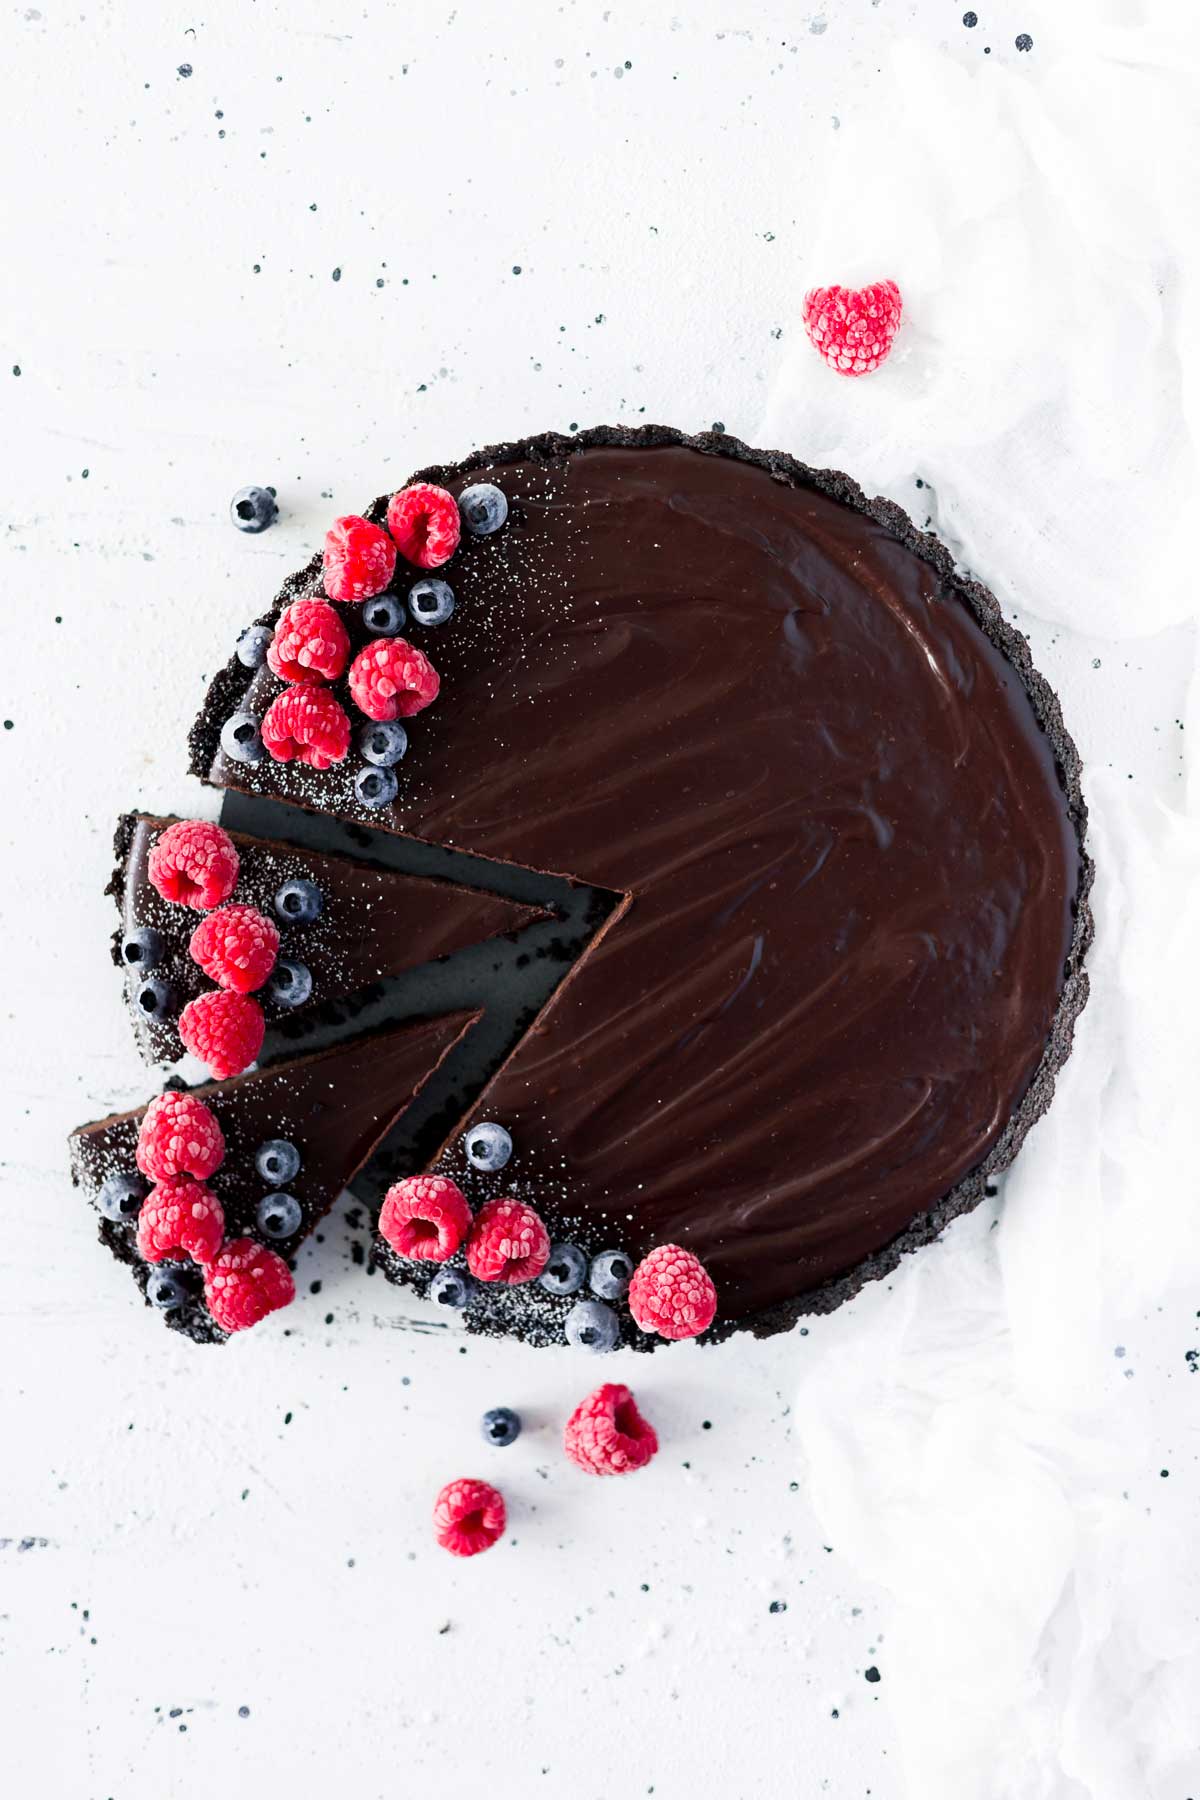 The Chocolate Truffle Tart of your dreams!